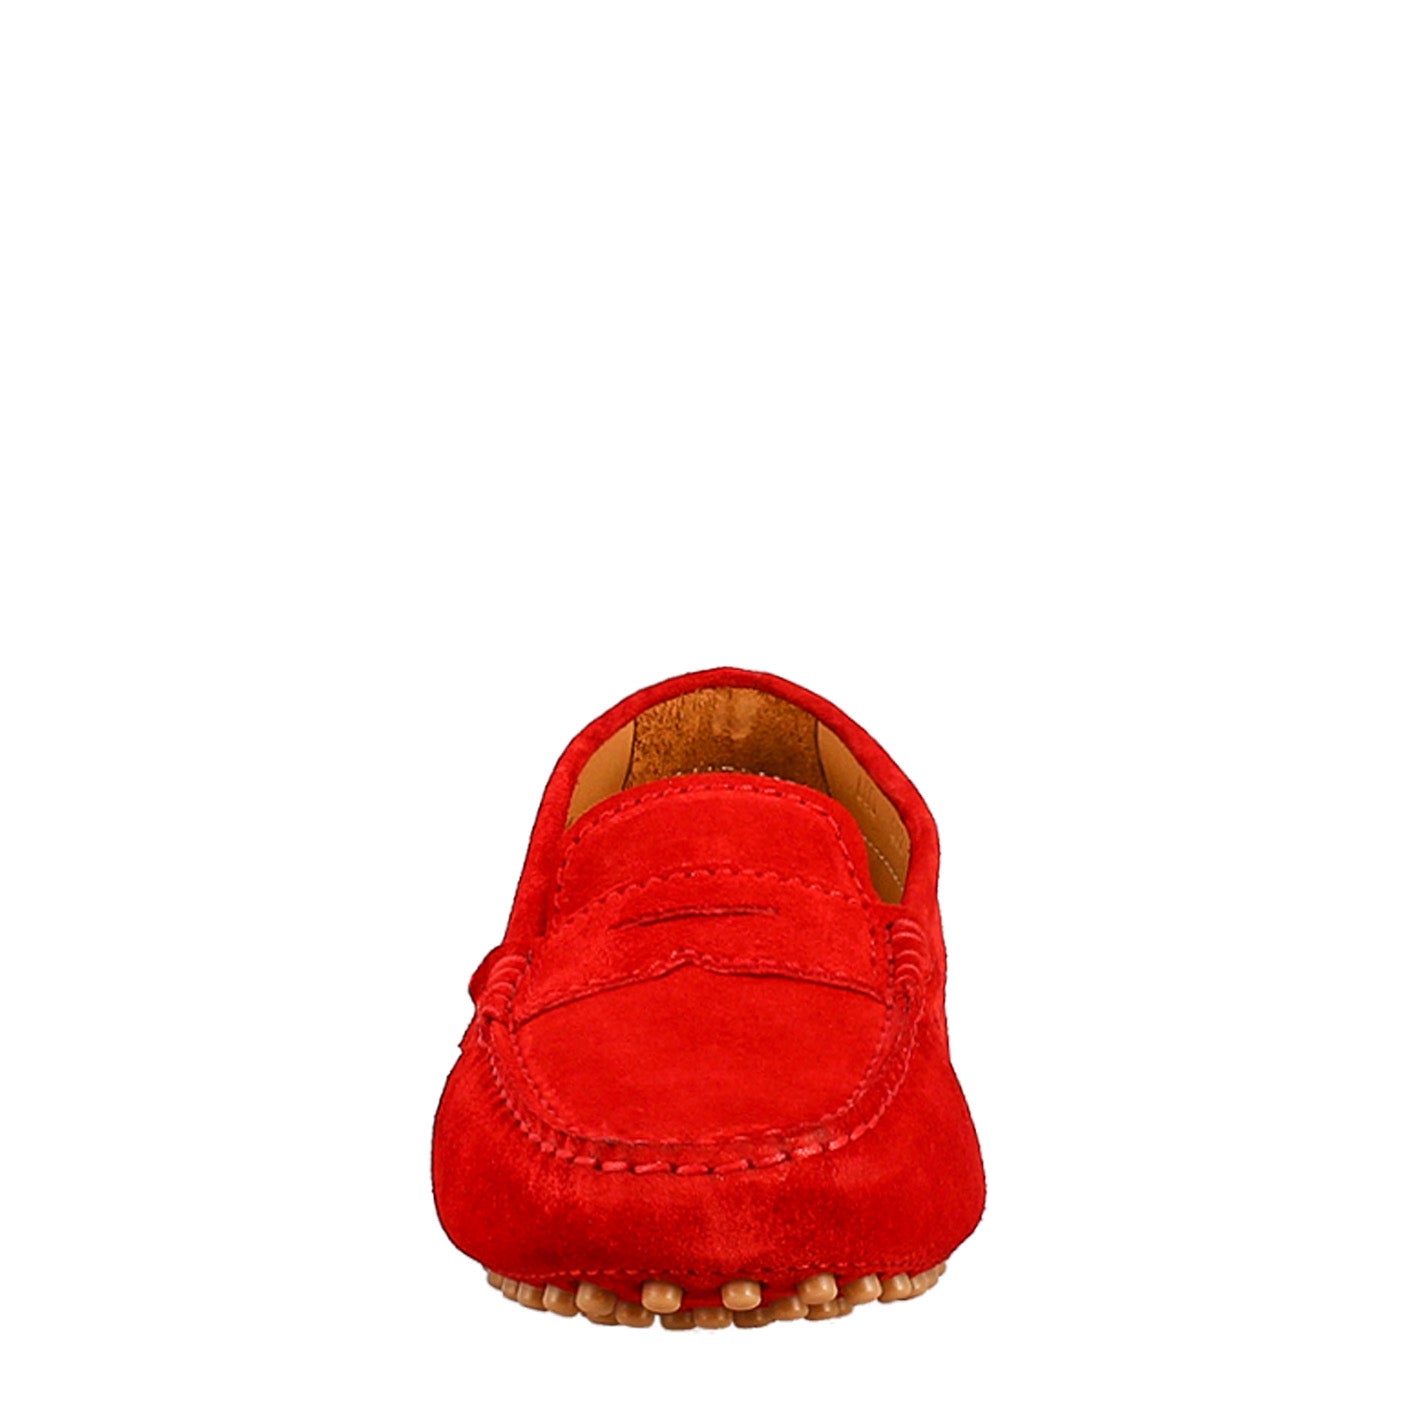 Tubular woman's moccasin in red suede